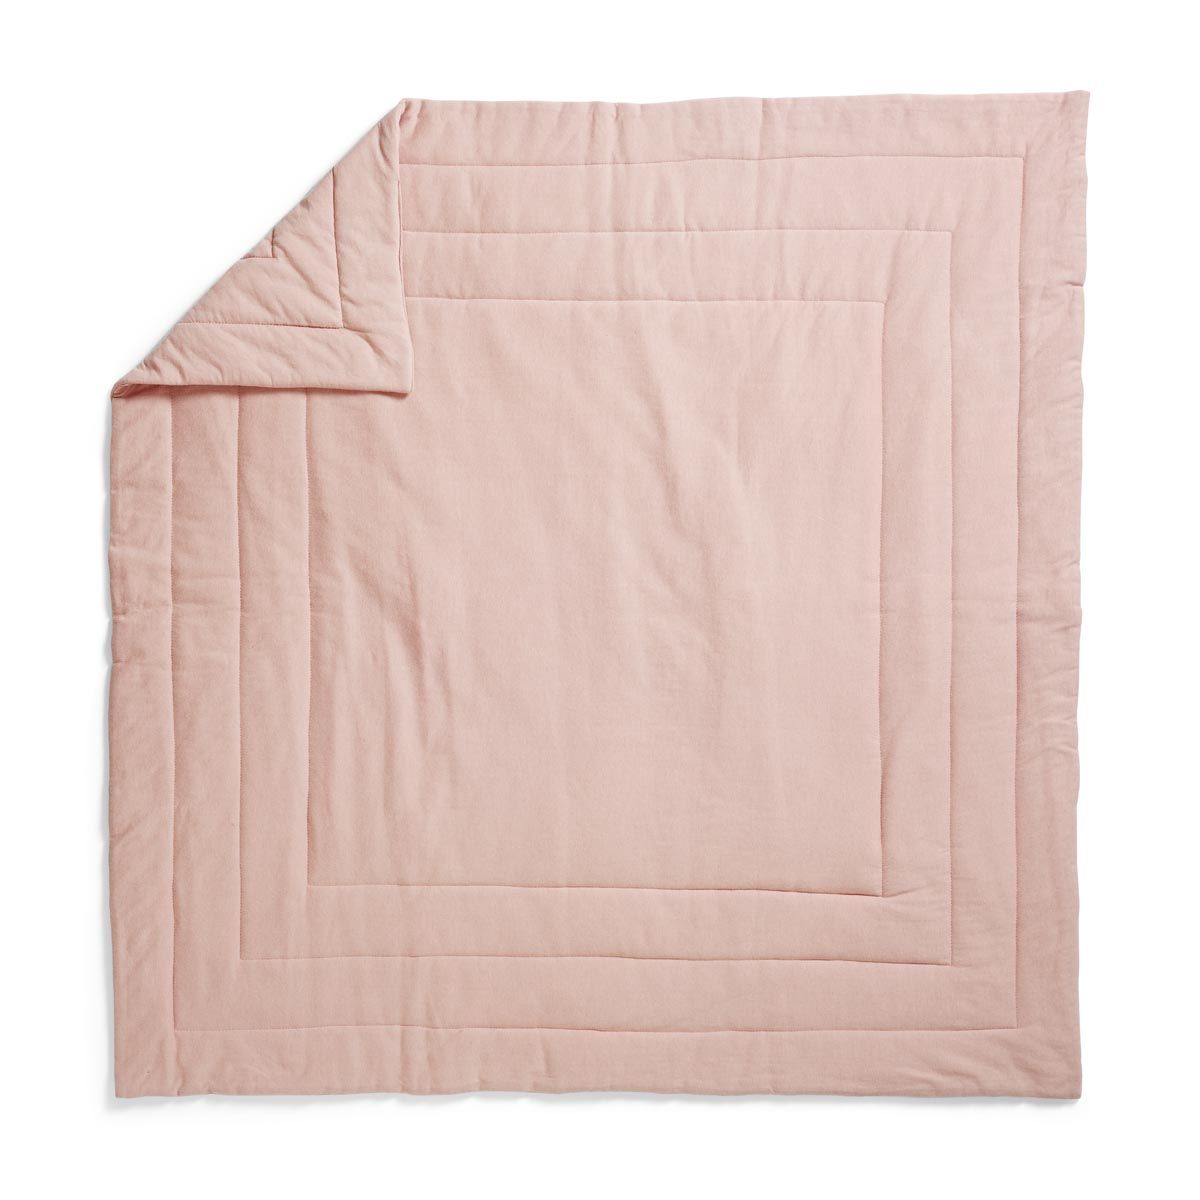 30325102151na-quilted-blanket-blushing-pink-front-aw22-pp